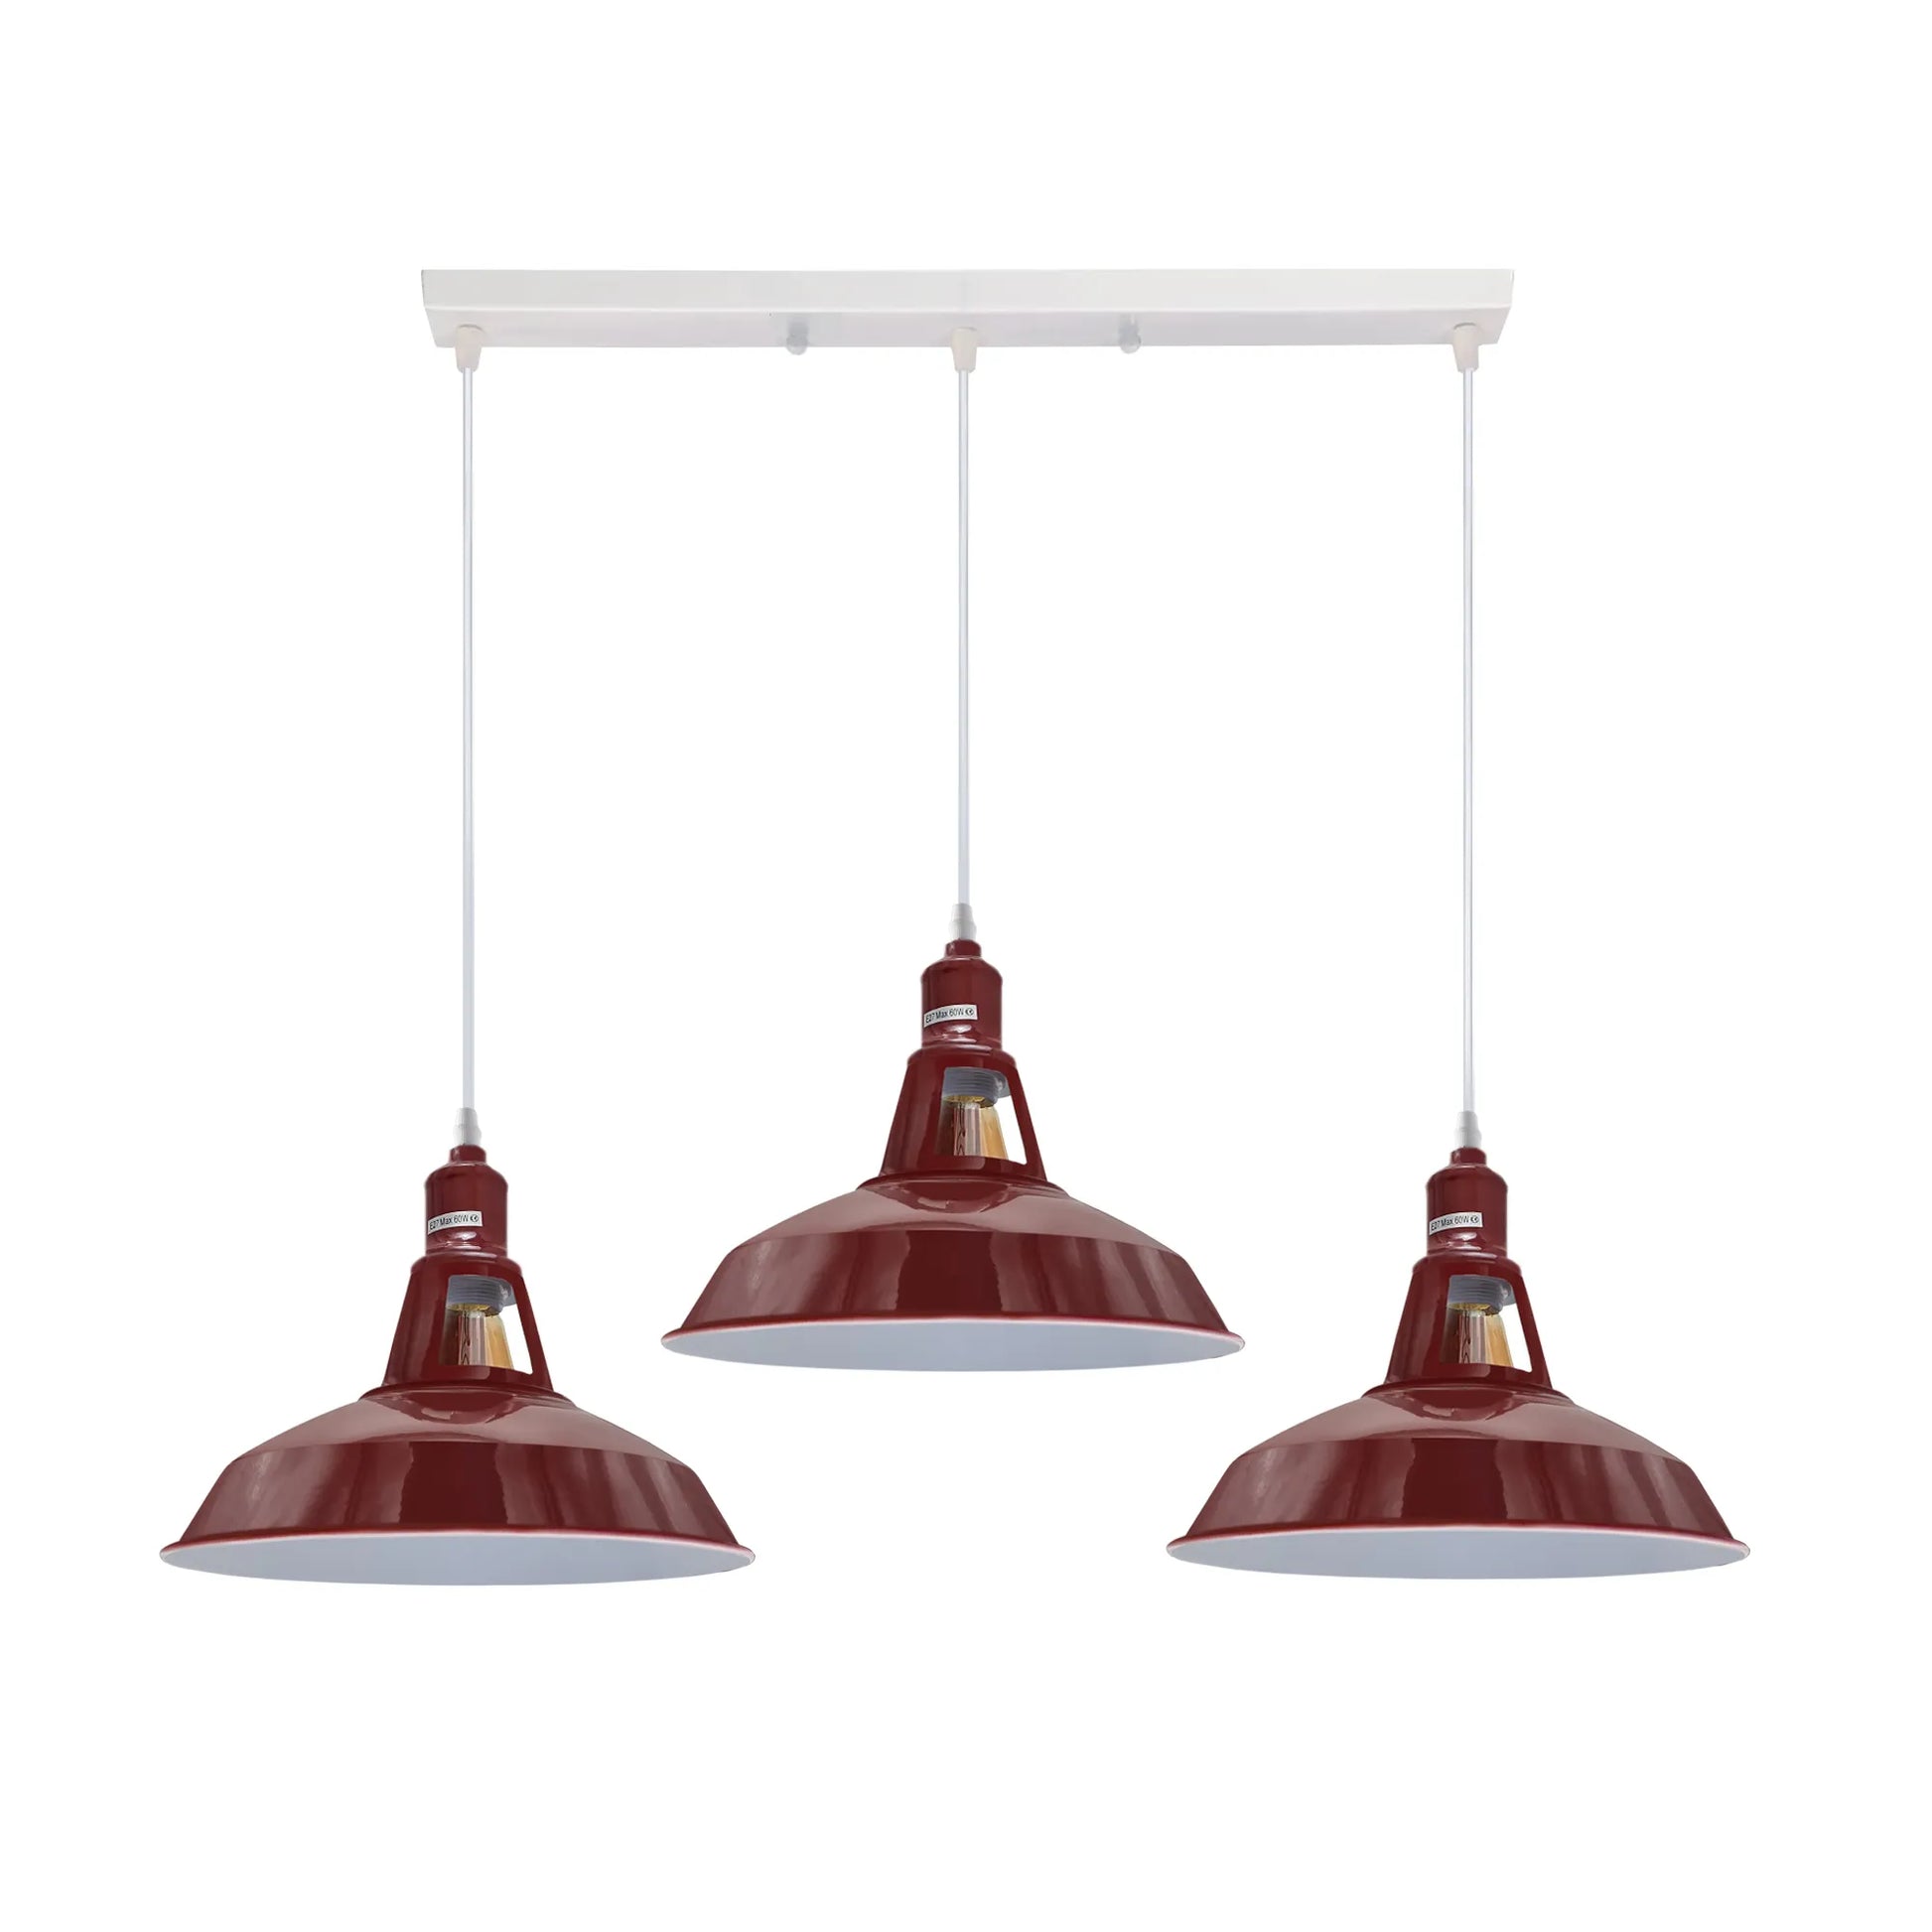 3 Way Ceiling Barn Slotted E27 Metal Pendent Light Fixture 